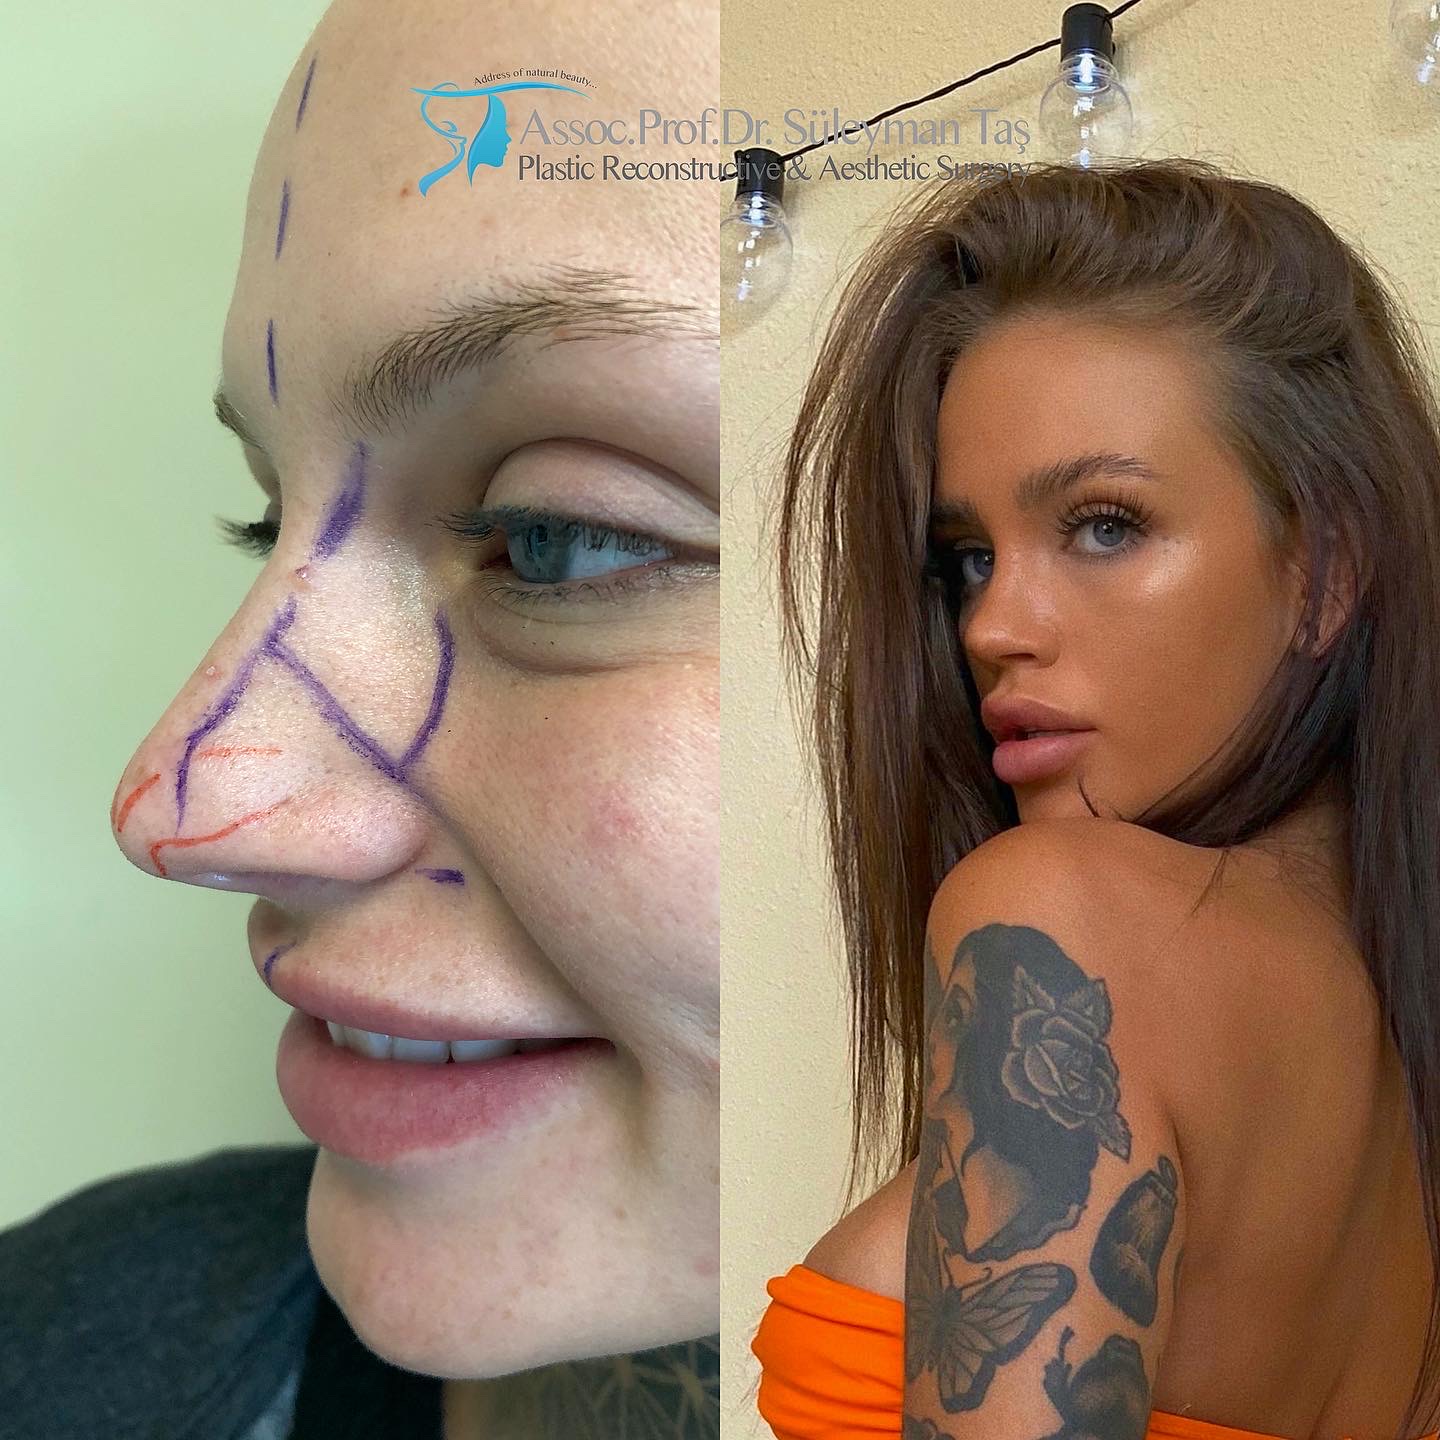 How much is the price of rhinoplasty?